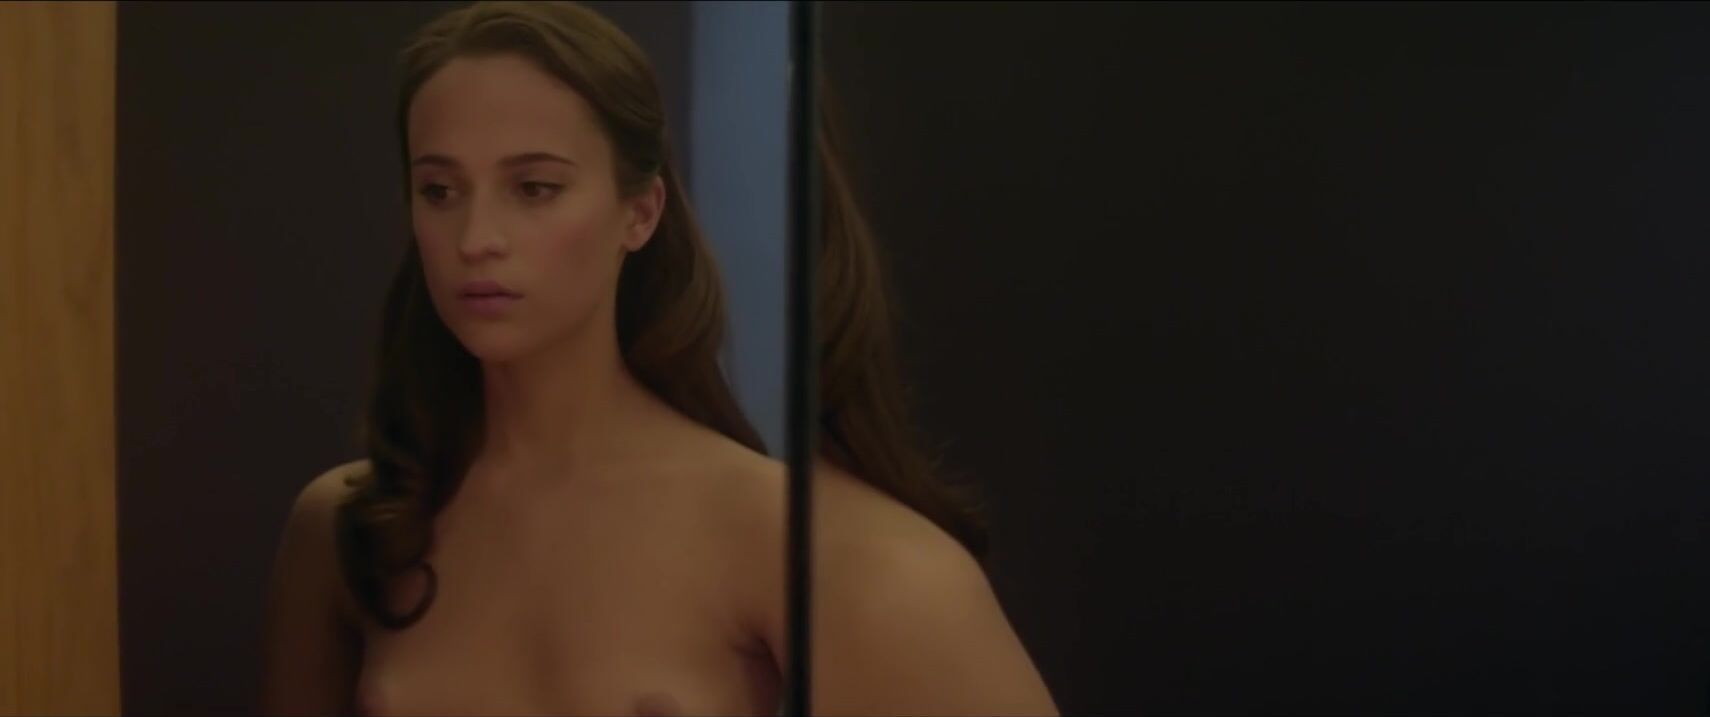 Gorgeous Naked Alicia Vikander loves being sexy in feature film moment from Ex Machina (2015) Hotel